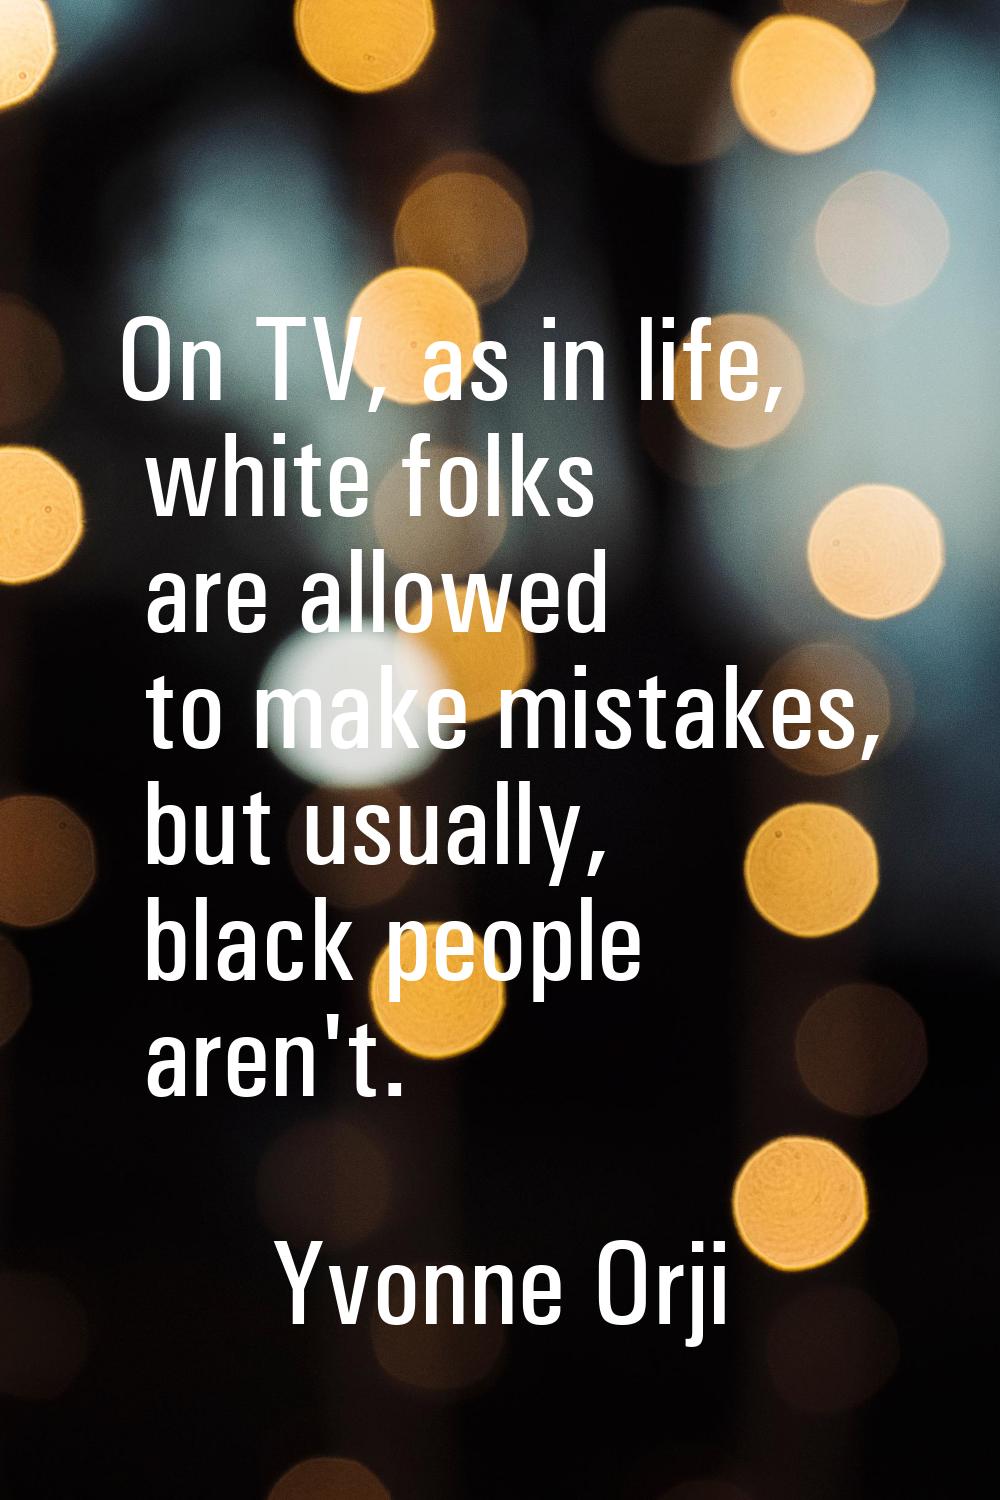 On TV, as in life, white folks are allowed to make mistakes, but usually, black people aren't.